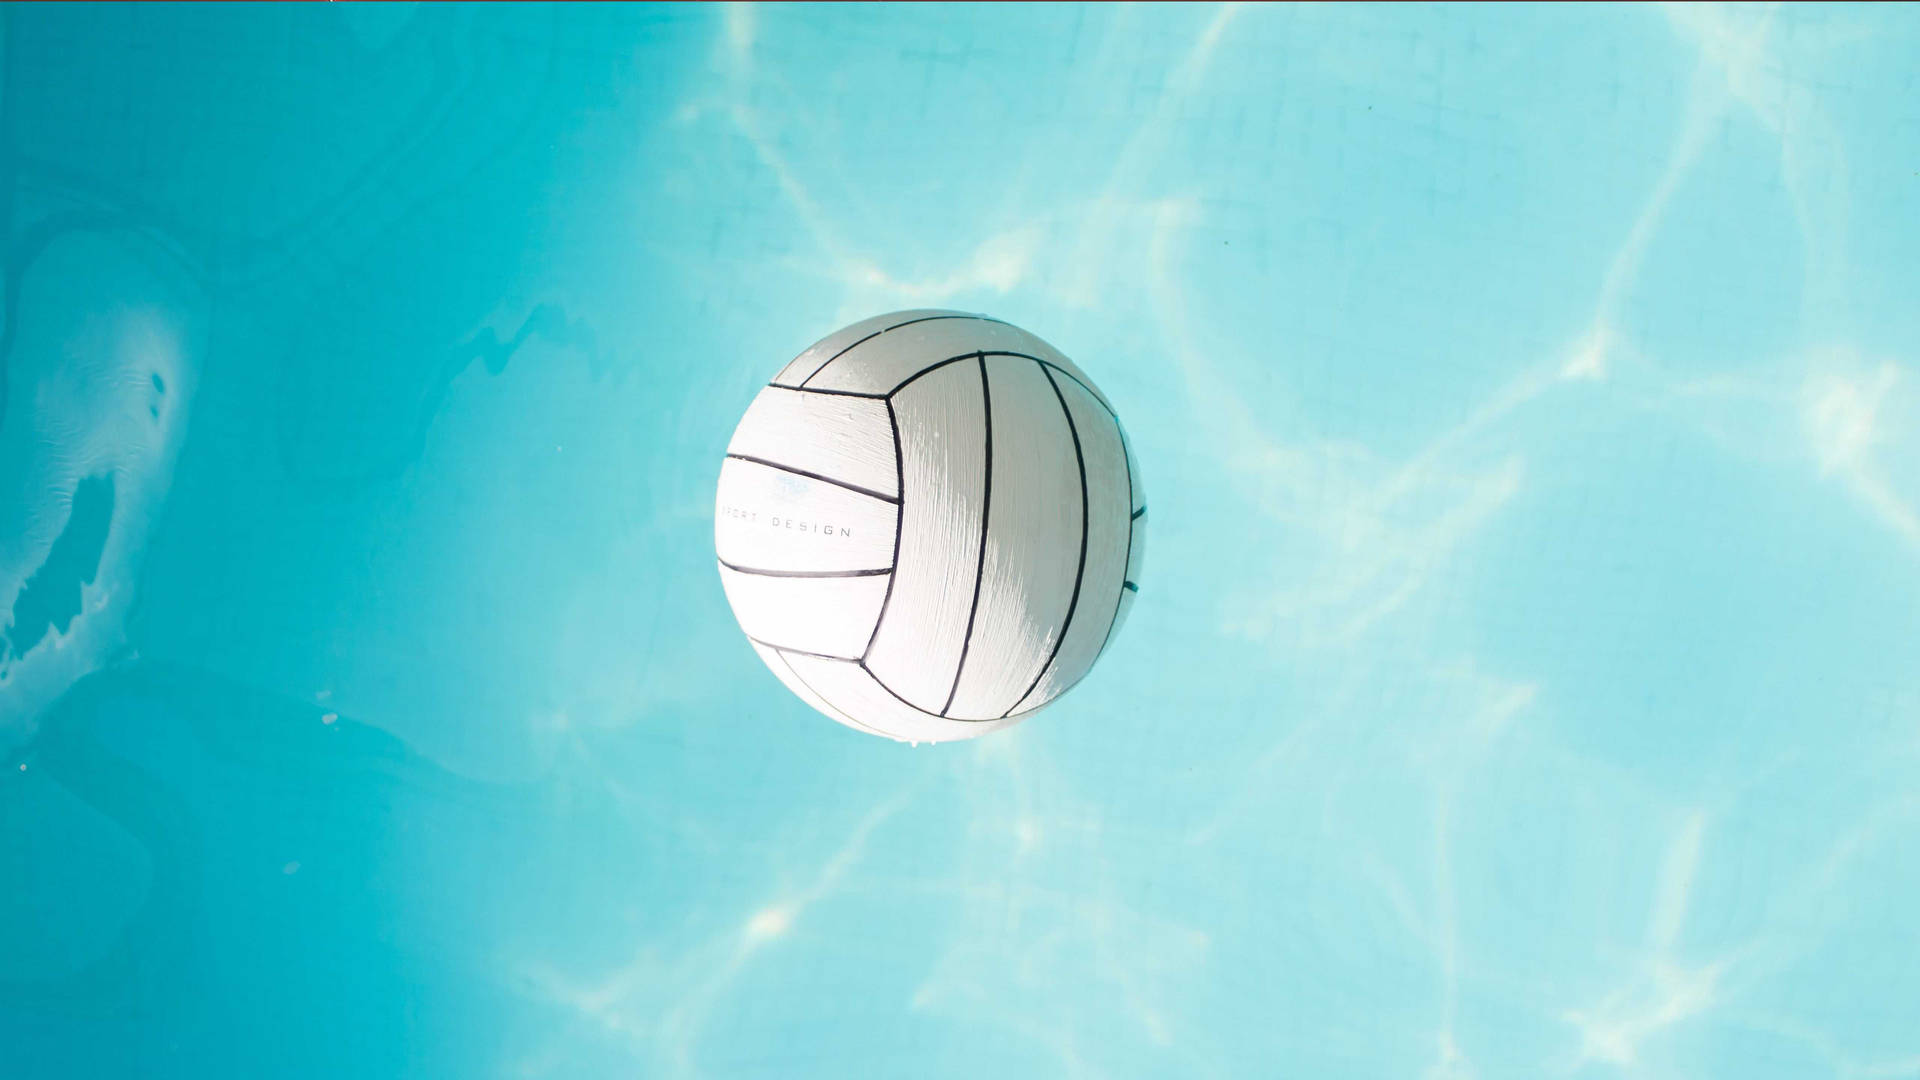 Floating Volleyball 4k Background